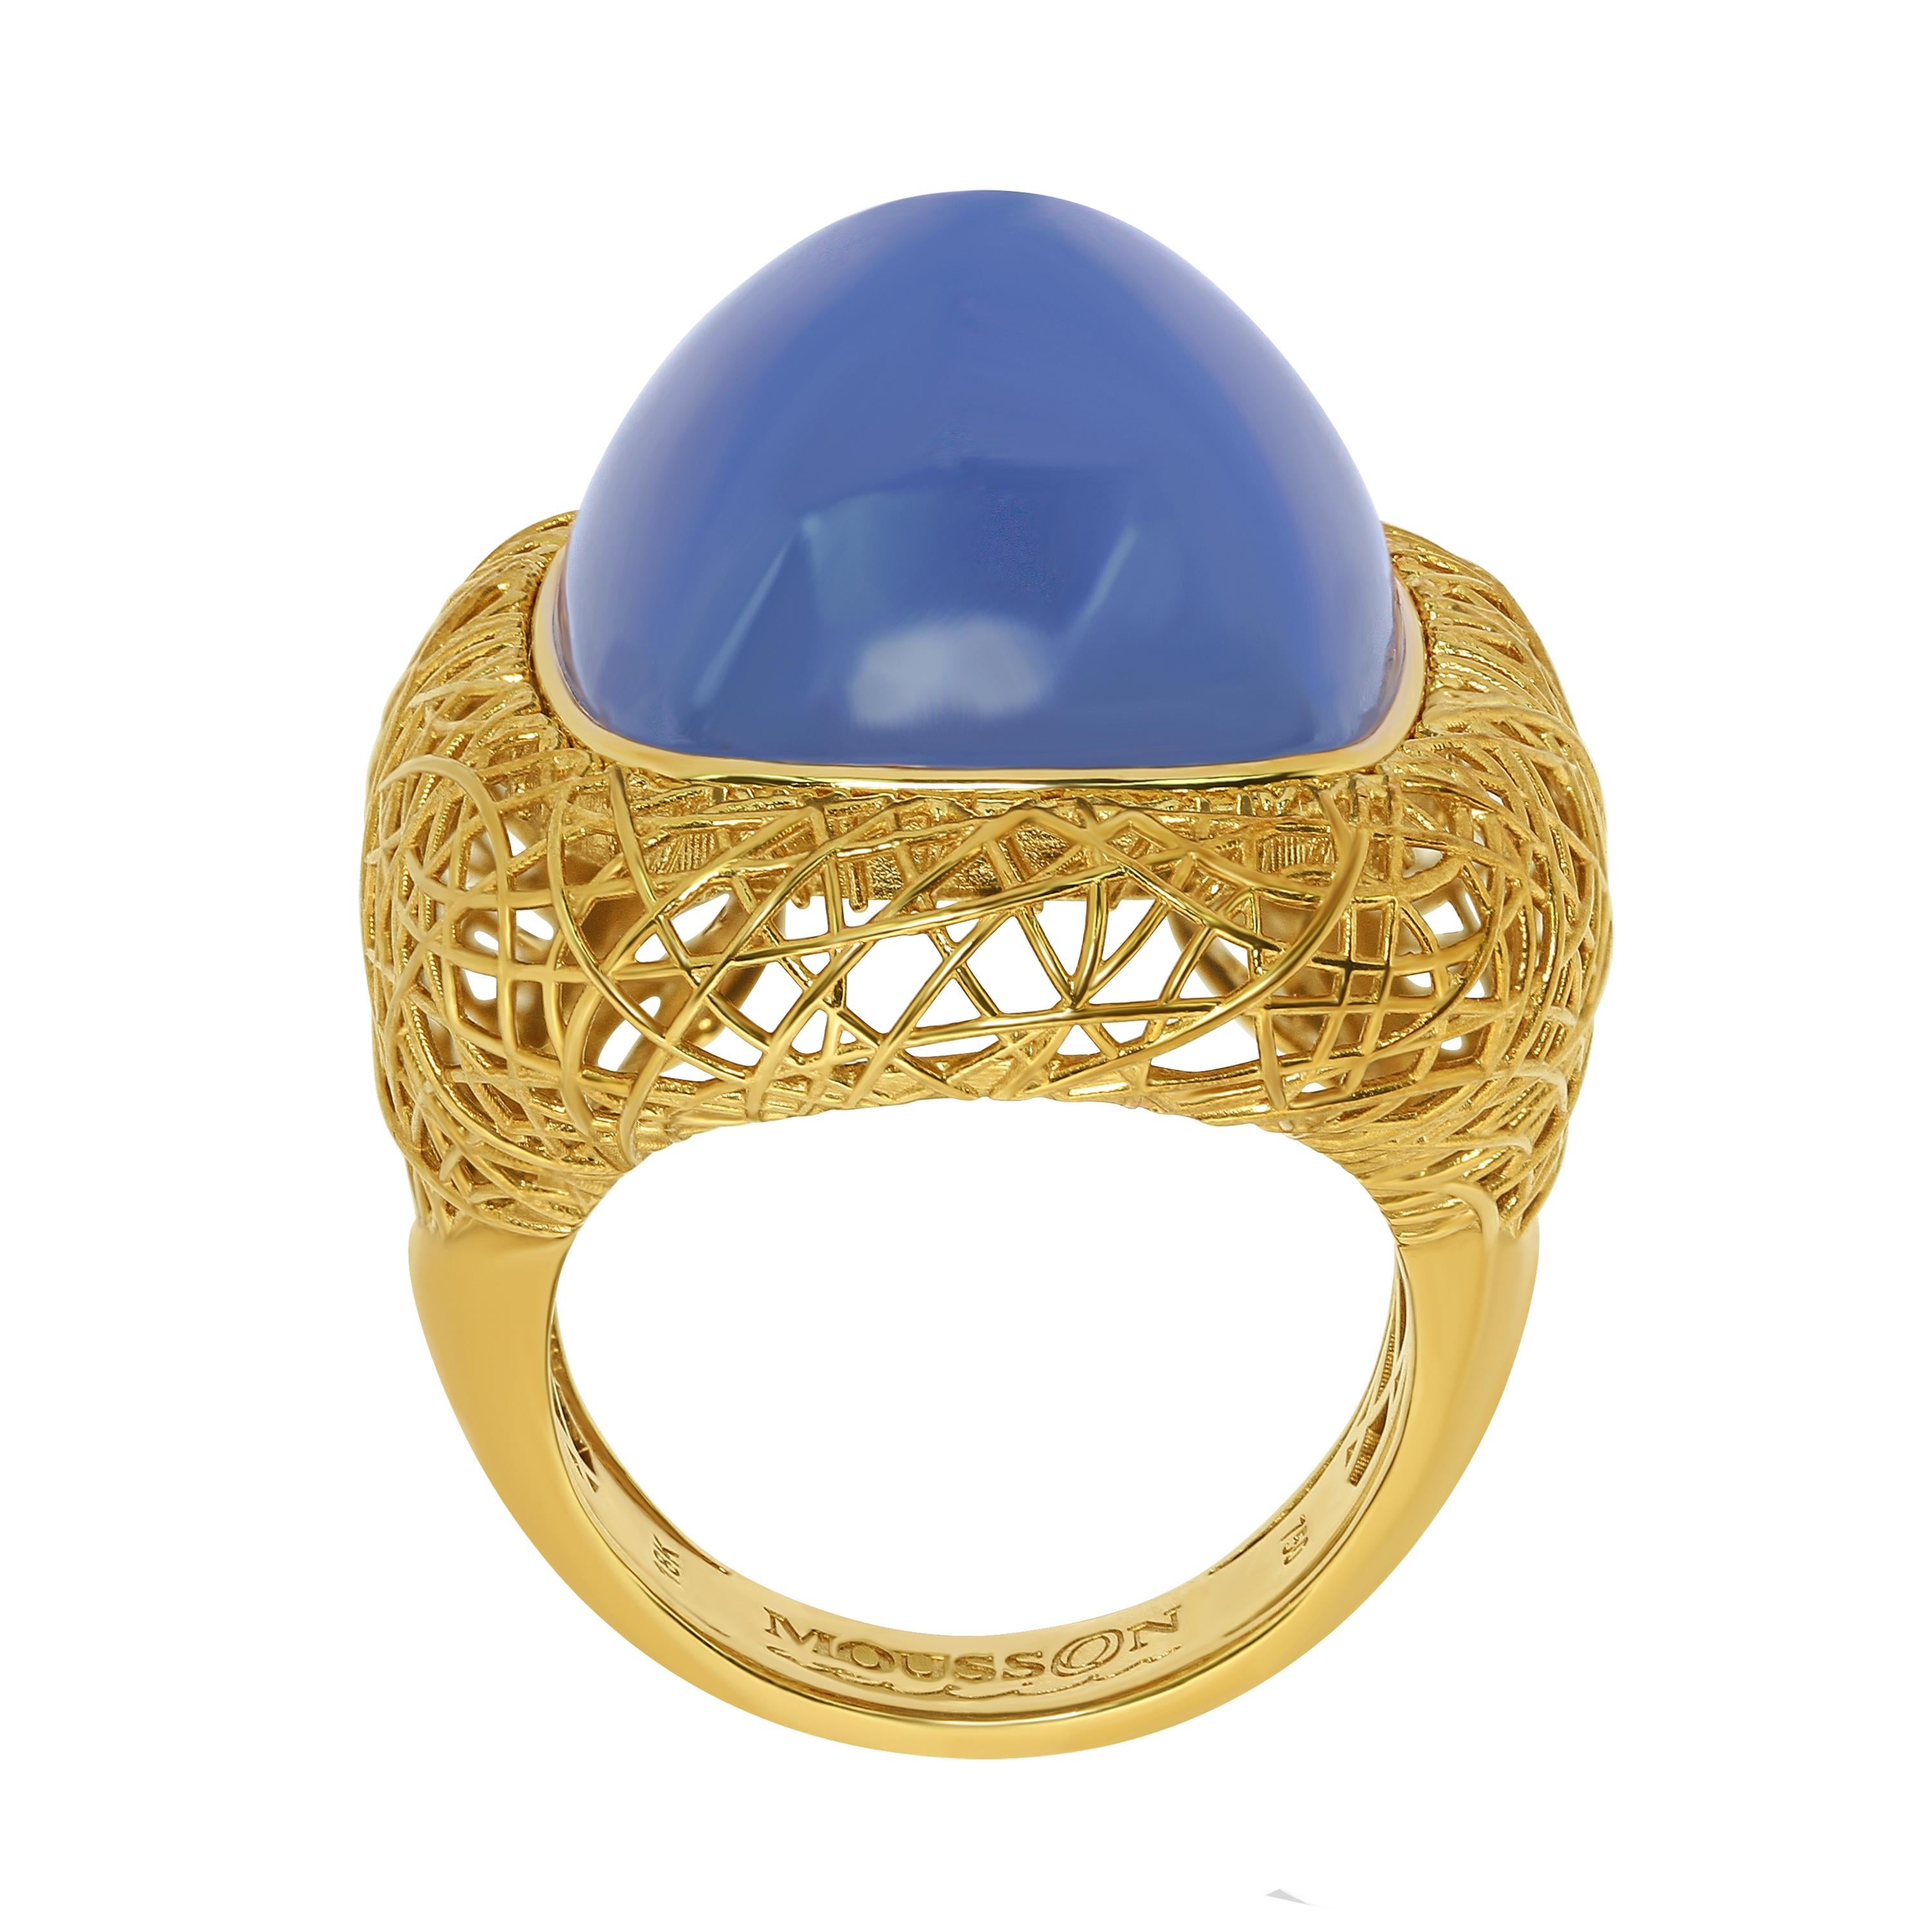 Blue Chalcedony 27.41 Carat 18 Karat Yellow Gold Rolling Stones Ring
We all know about Western movies, where rolling stones are moving all the time in the desert. Our collection is inspired by this amazing plant. Thin 